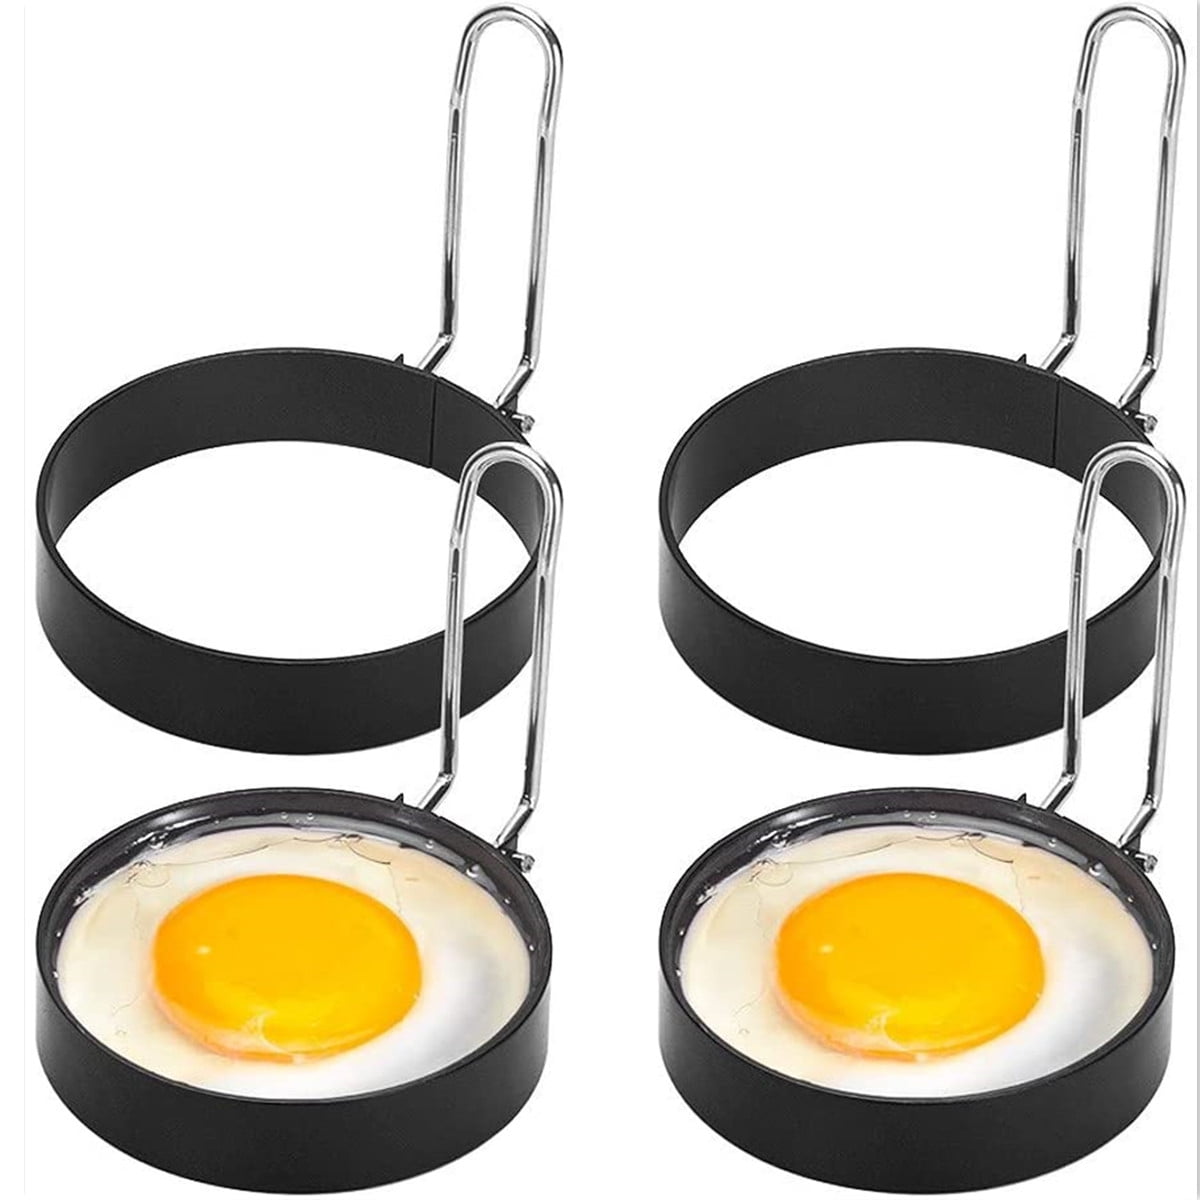 Egg Fryer, Funny Egg Pancake Cooking Tool, Professional Non-Stick Egg Ring,  Stainless Steel DIY Kitchen Egg Fried Mould with Handle (Shape A+B)